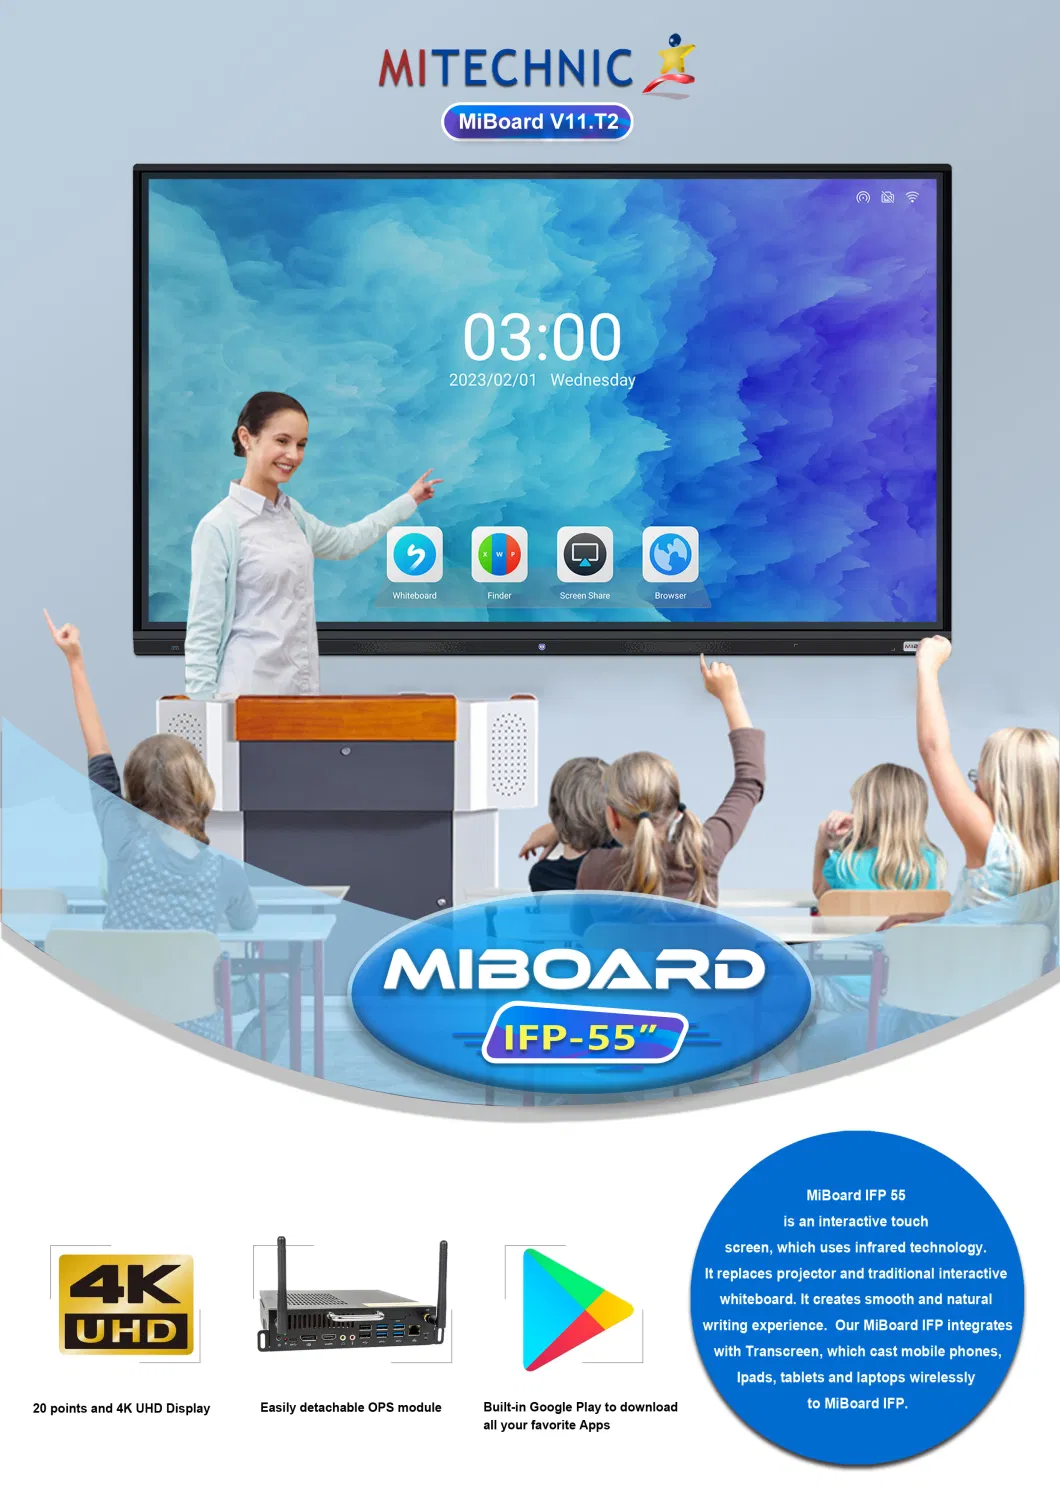 4K Multi Infrared LED Computer Touch Interactive Flat Smart Board Miboard Miboard V11. T2 Conference Meeting Whiteboard Display LCD Screen 55 Inch